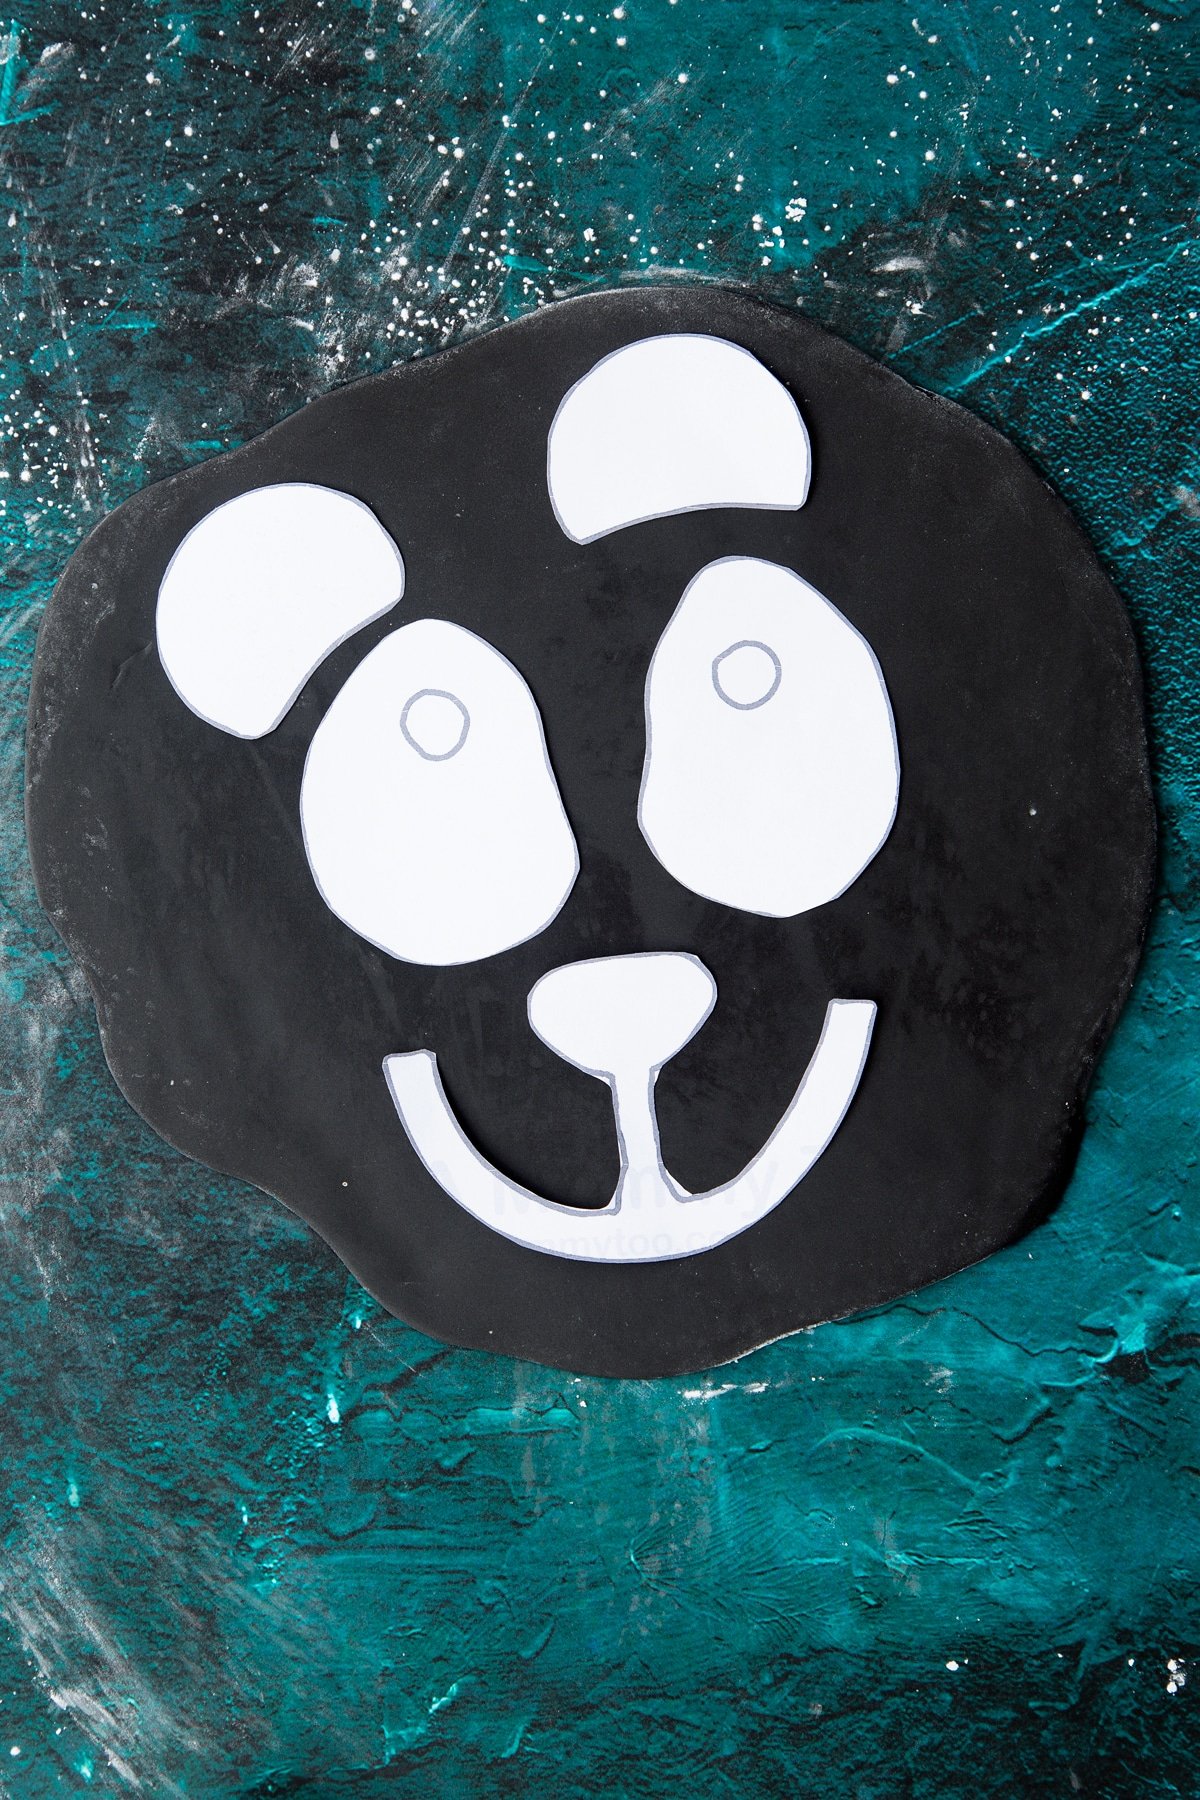 paper cut outs of a panda face placed on black royal icing.